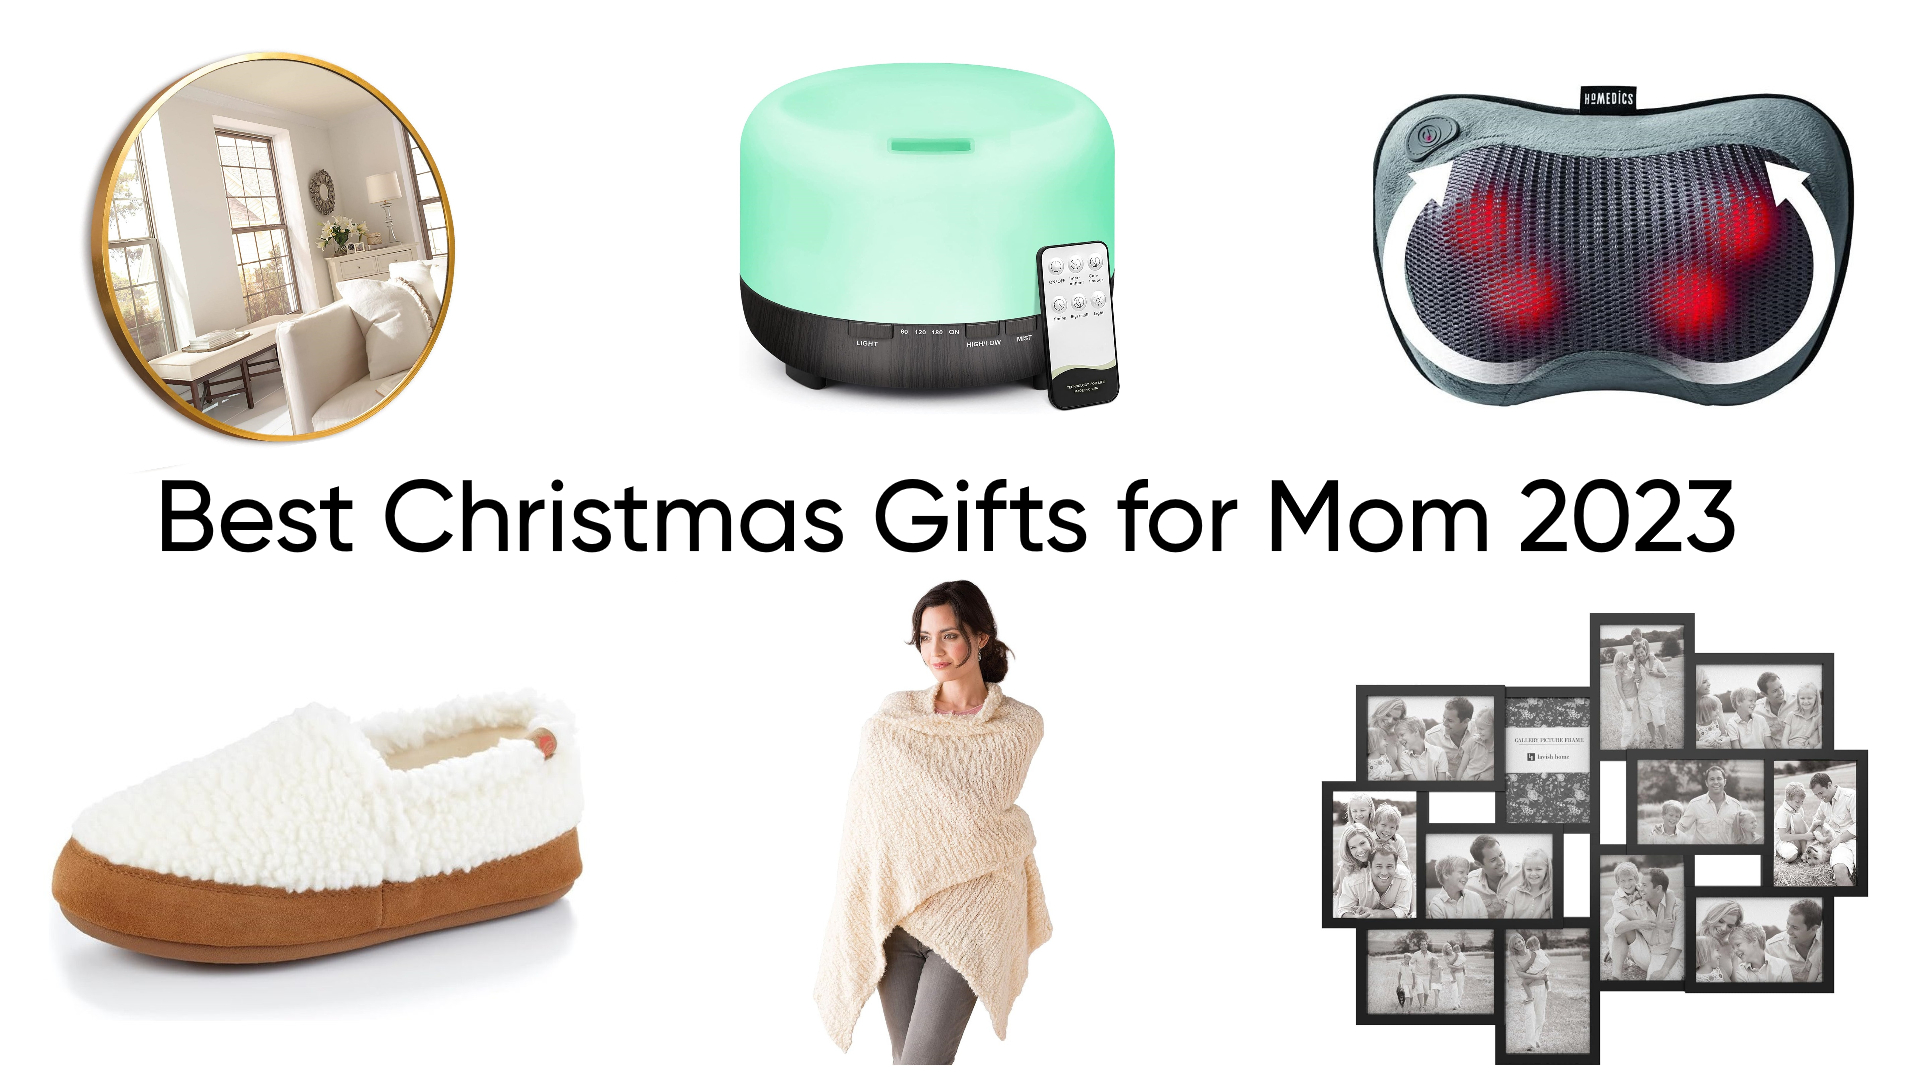 Best Christmas Gifts for Mother in 2023